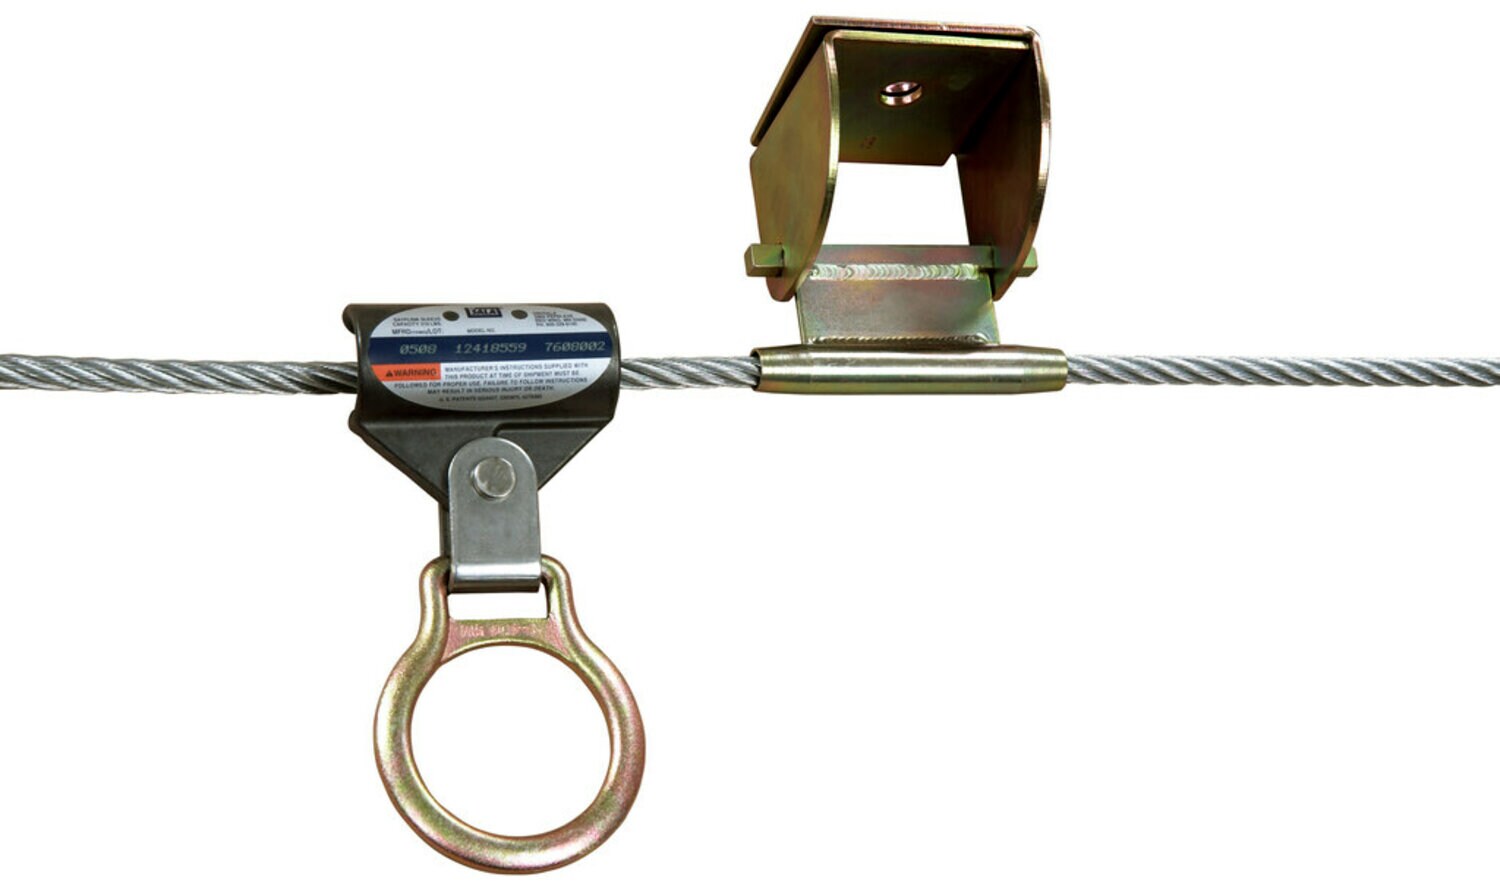 7012820327 - 3M DBI-SALA Permanent Multi-Span Horizontal Lifeline System 7603076, Stainless Steel Cable, 60 ft